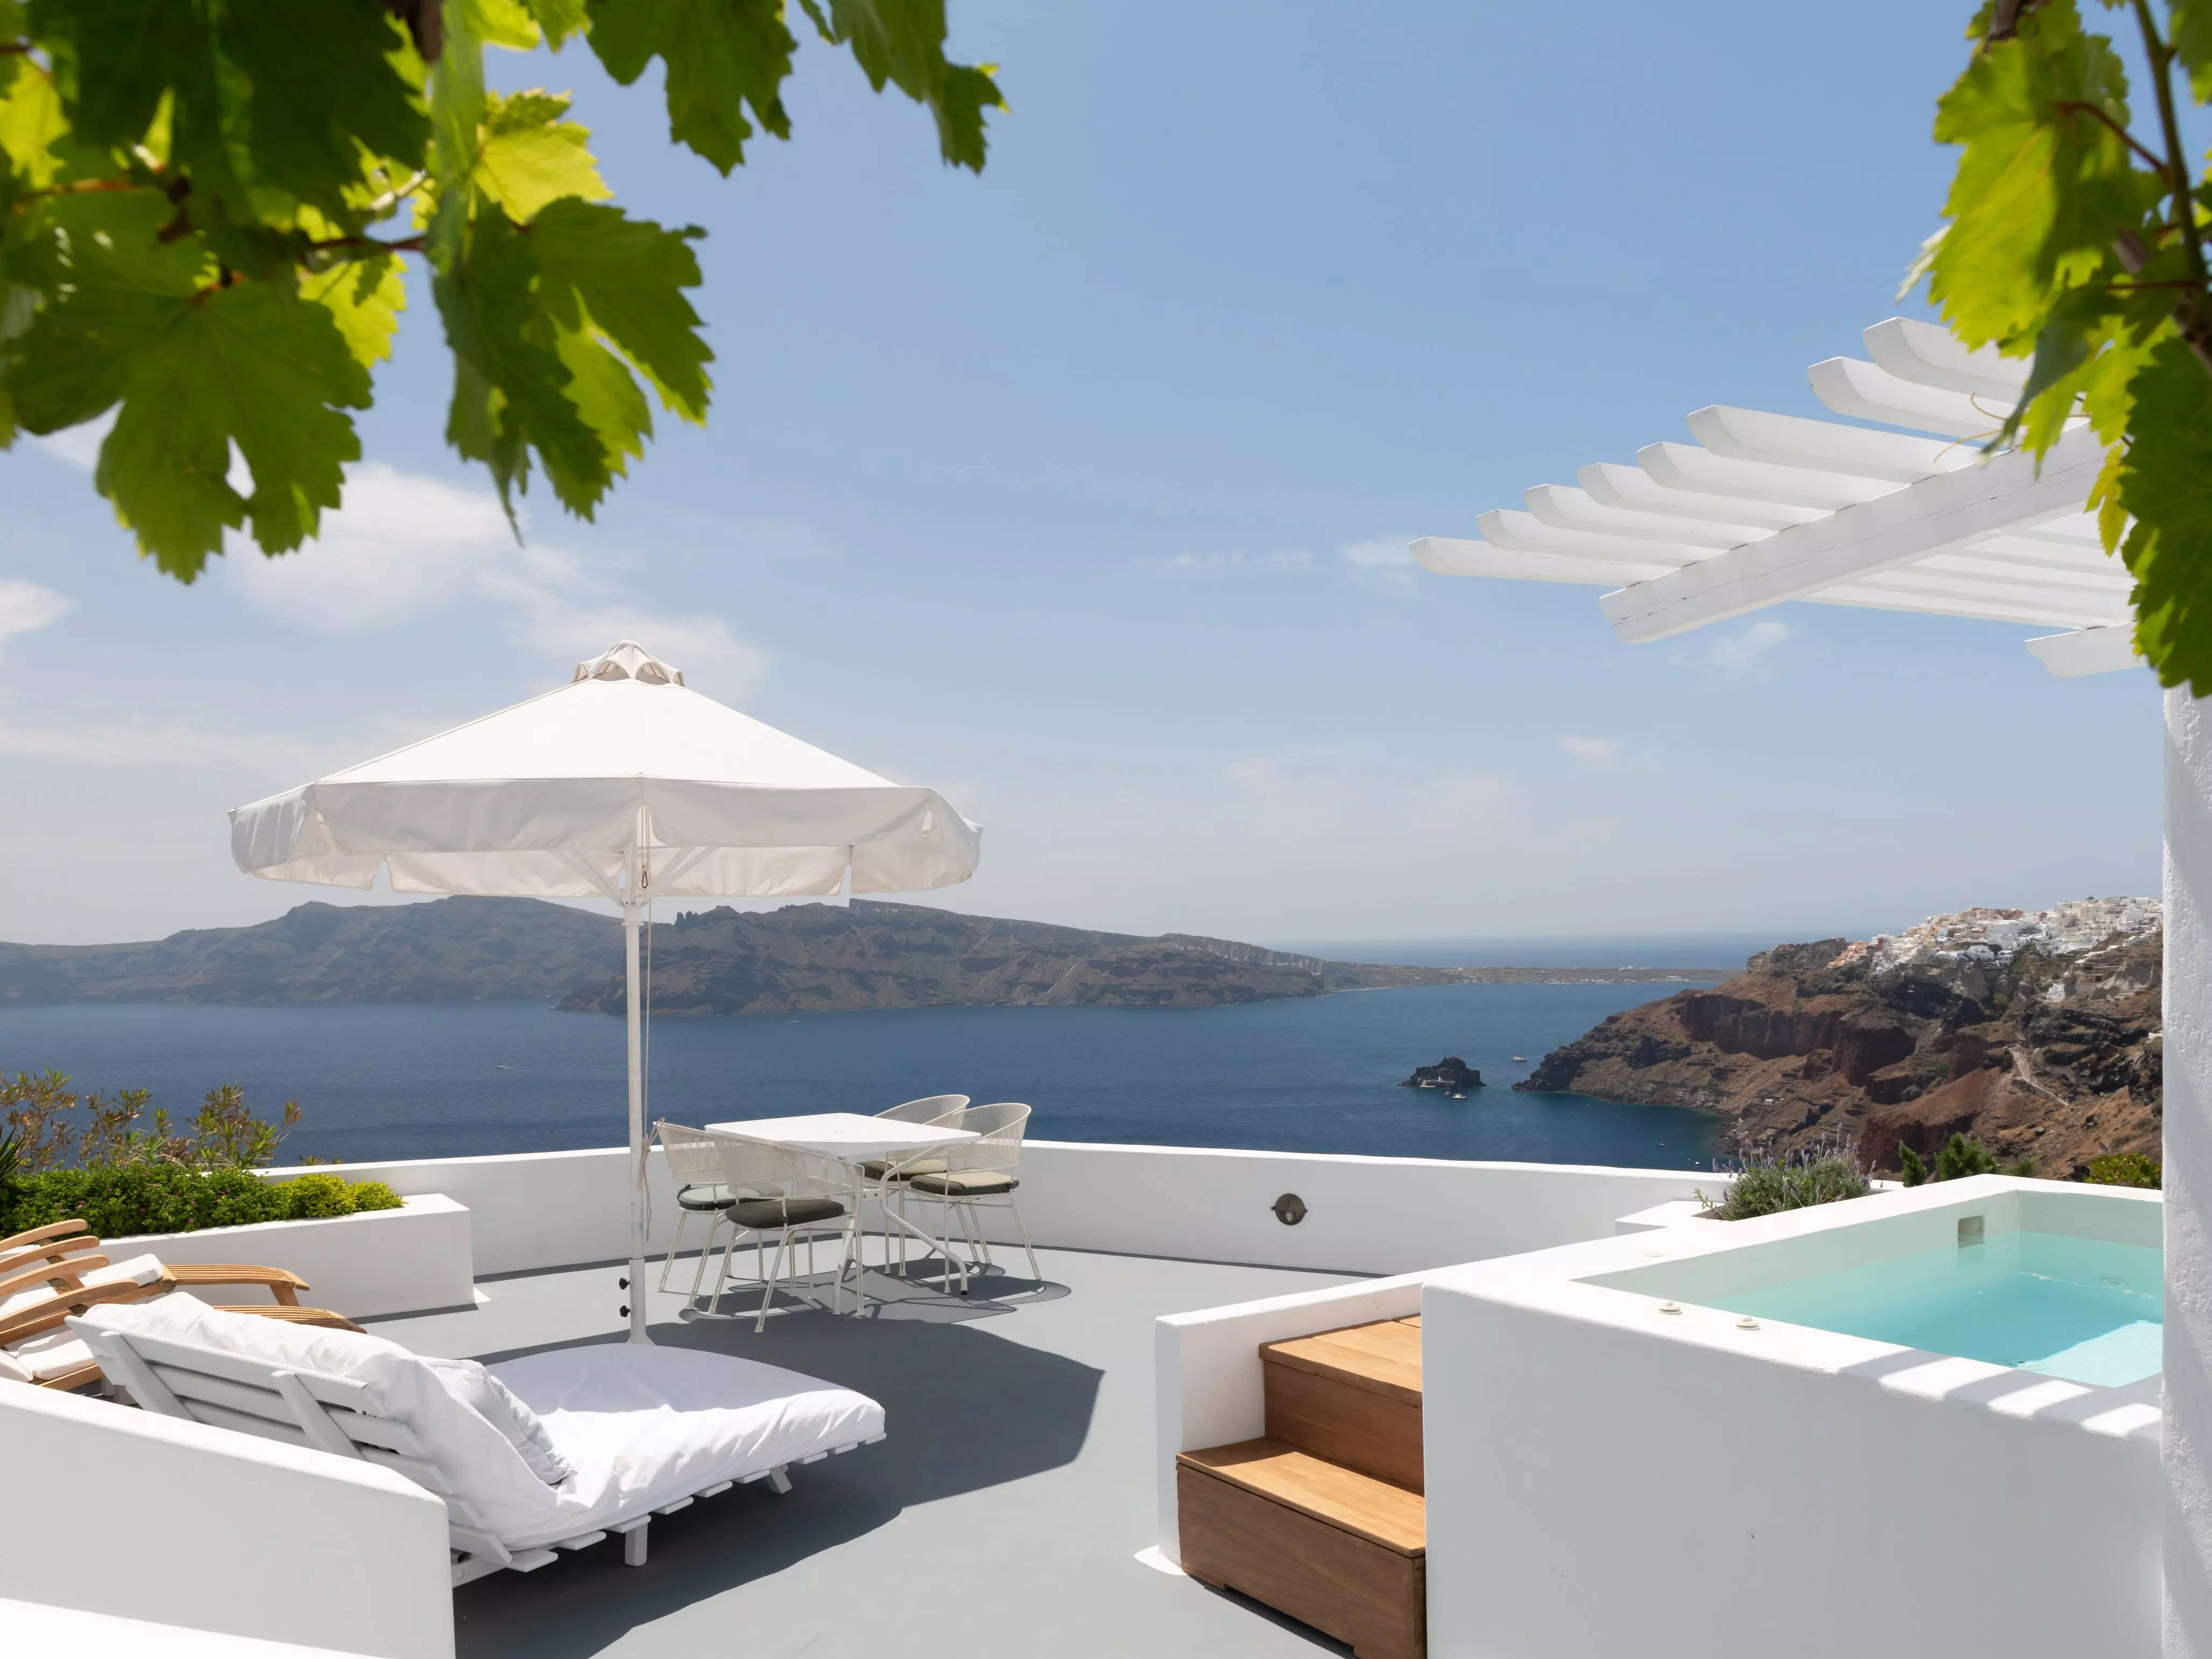 10 swoon-worthy hotels in Santorini with cliffside cave rooms and infinity pools that are also affordable, according to a professional hotel reviewer